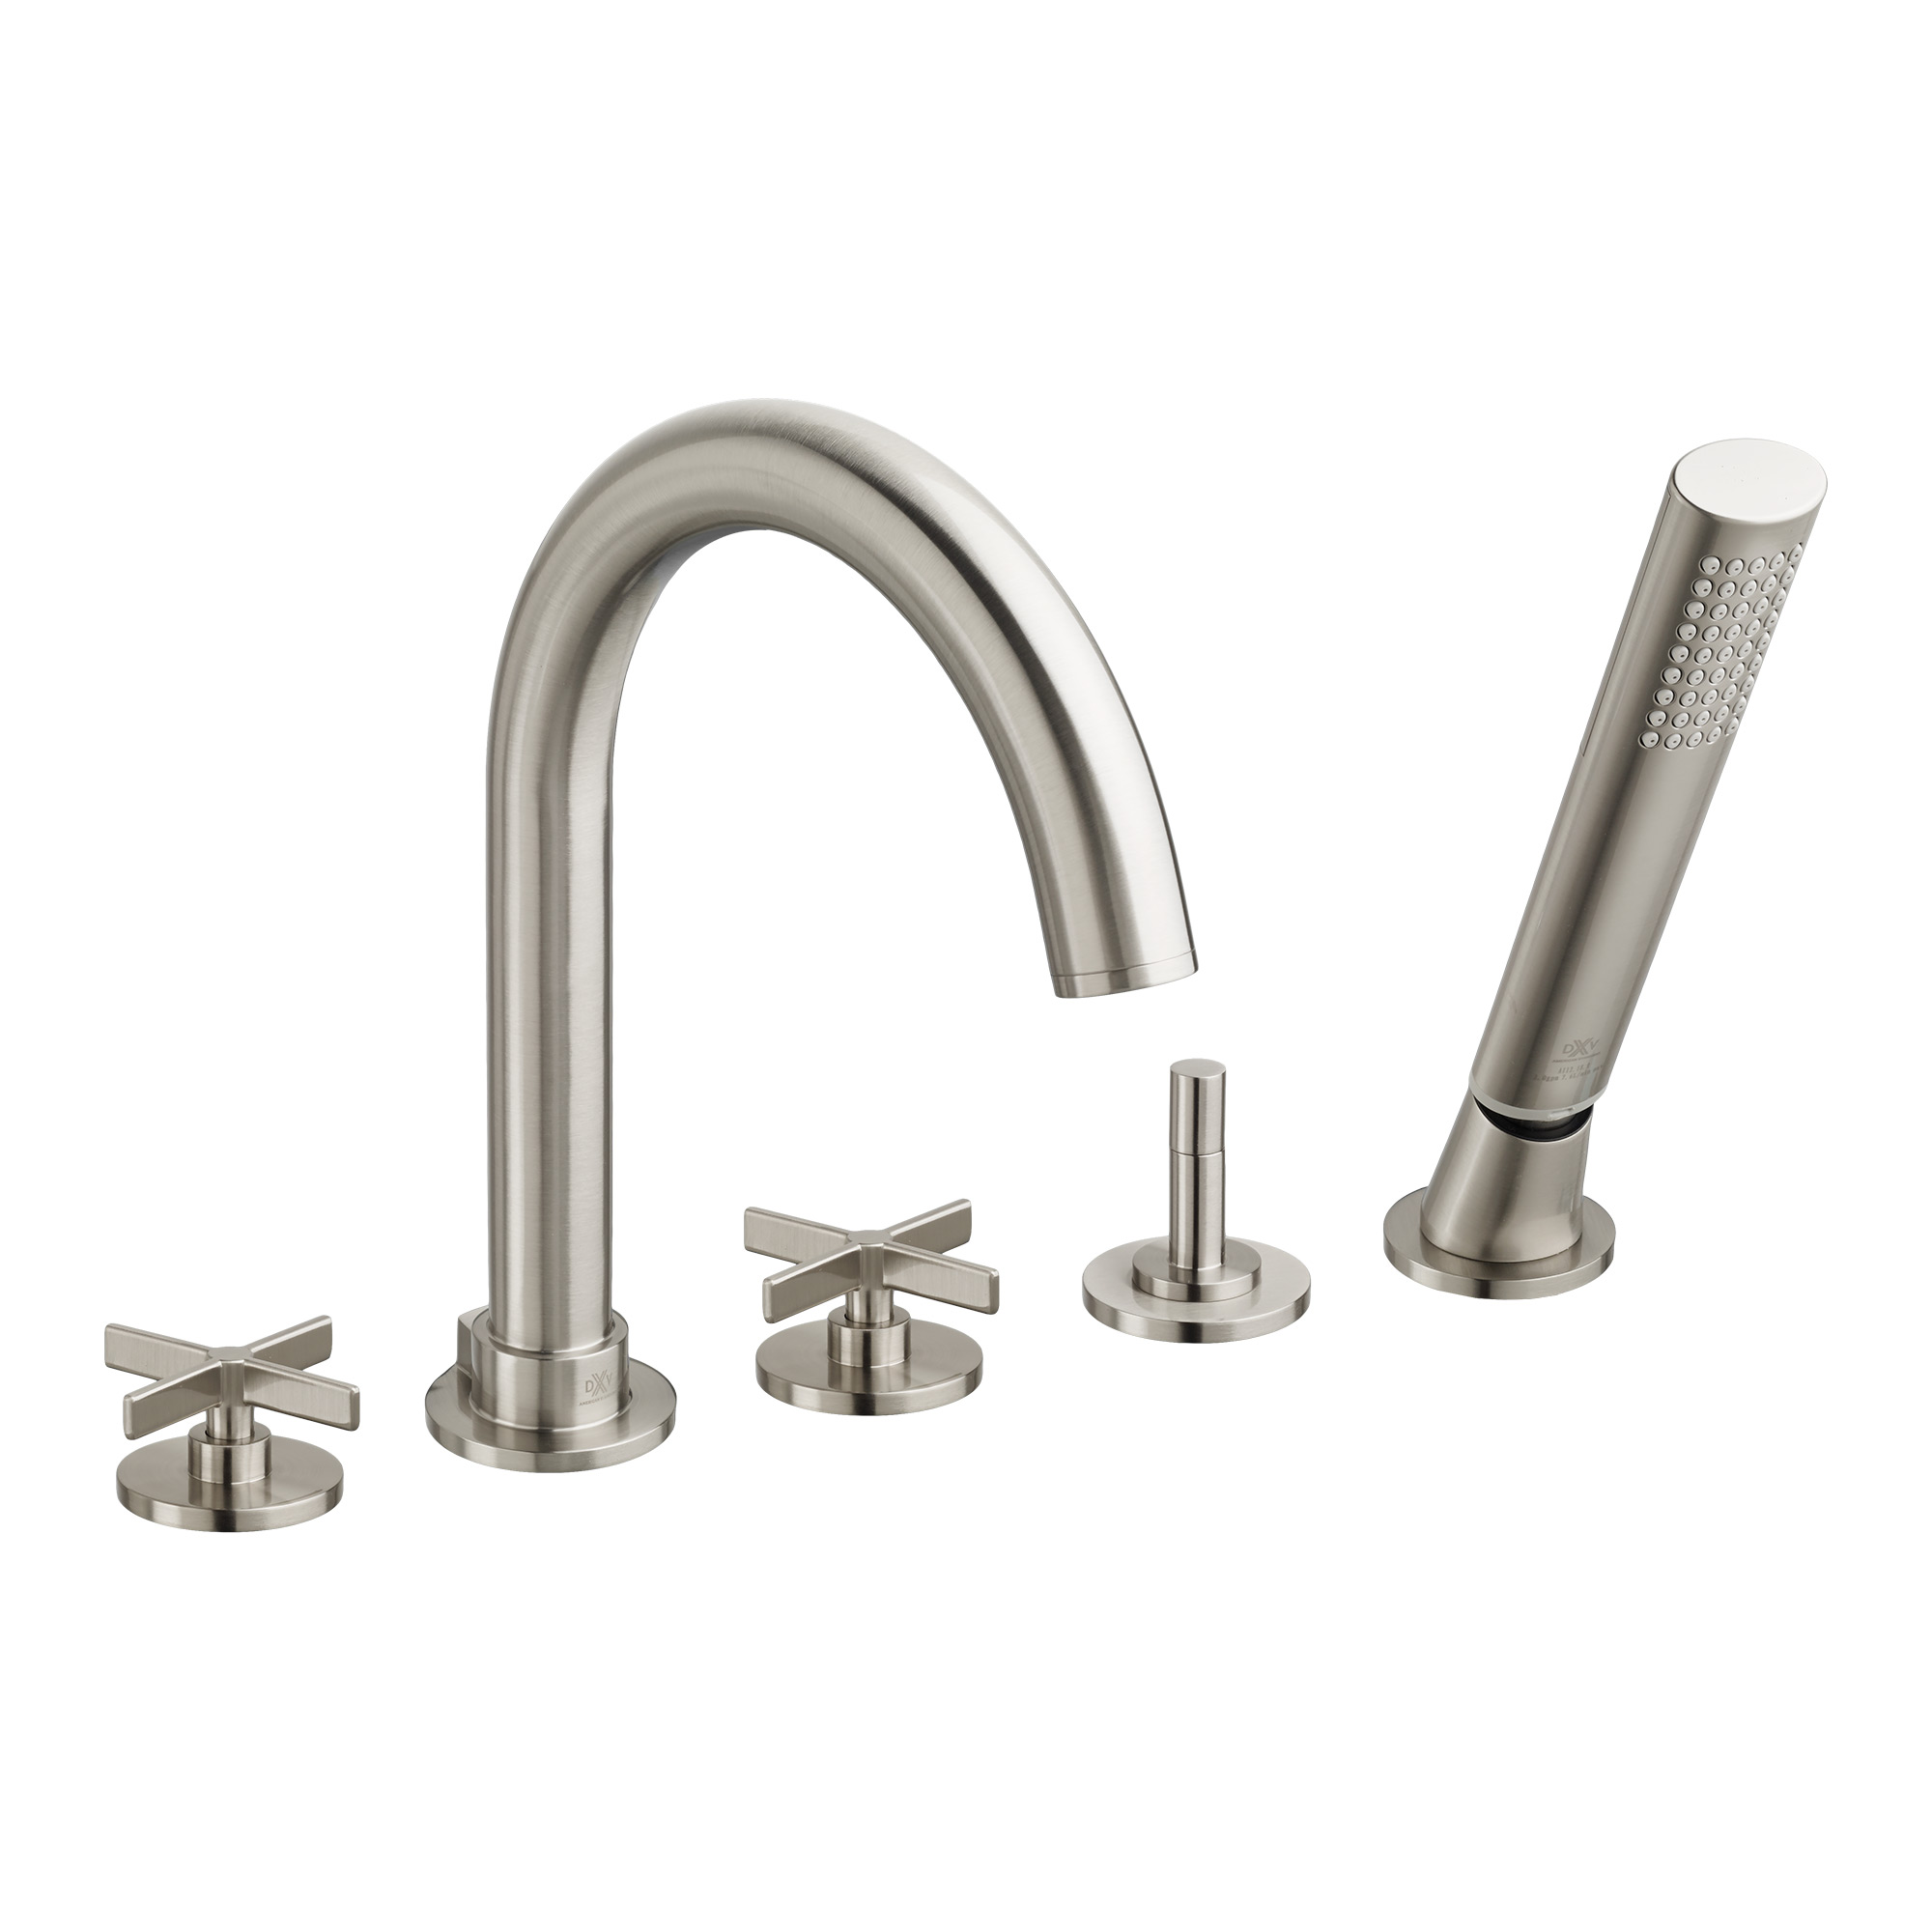 Percy 2-Handle Deck Mount Bathtub Faucet with Hand Shower and Cross Handles